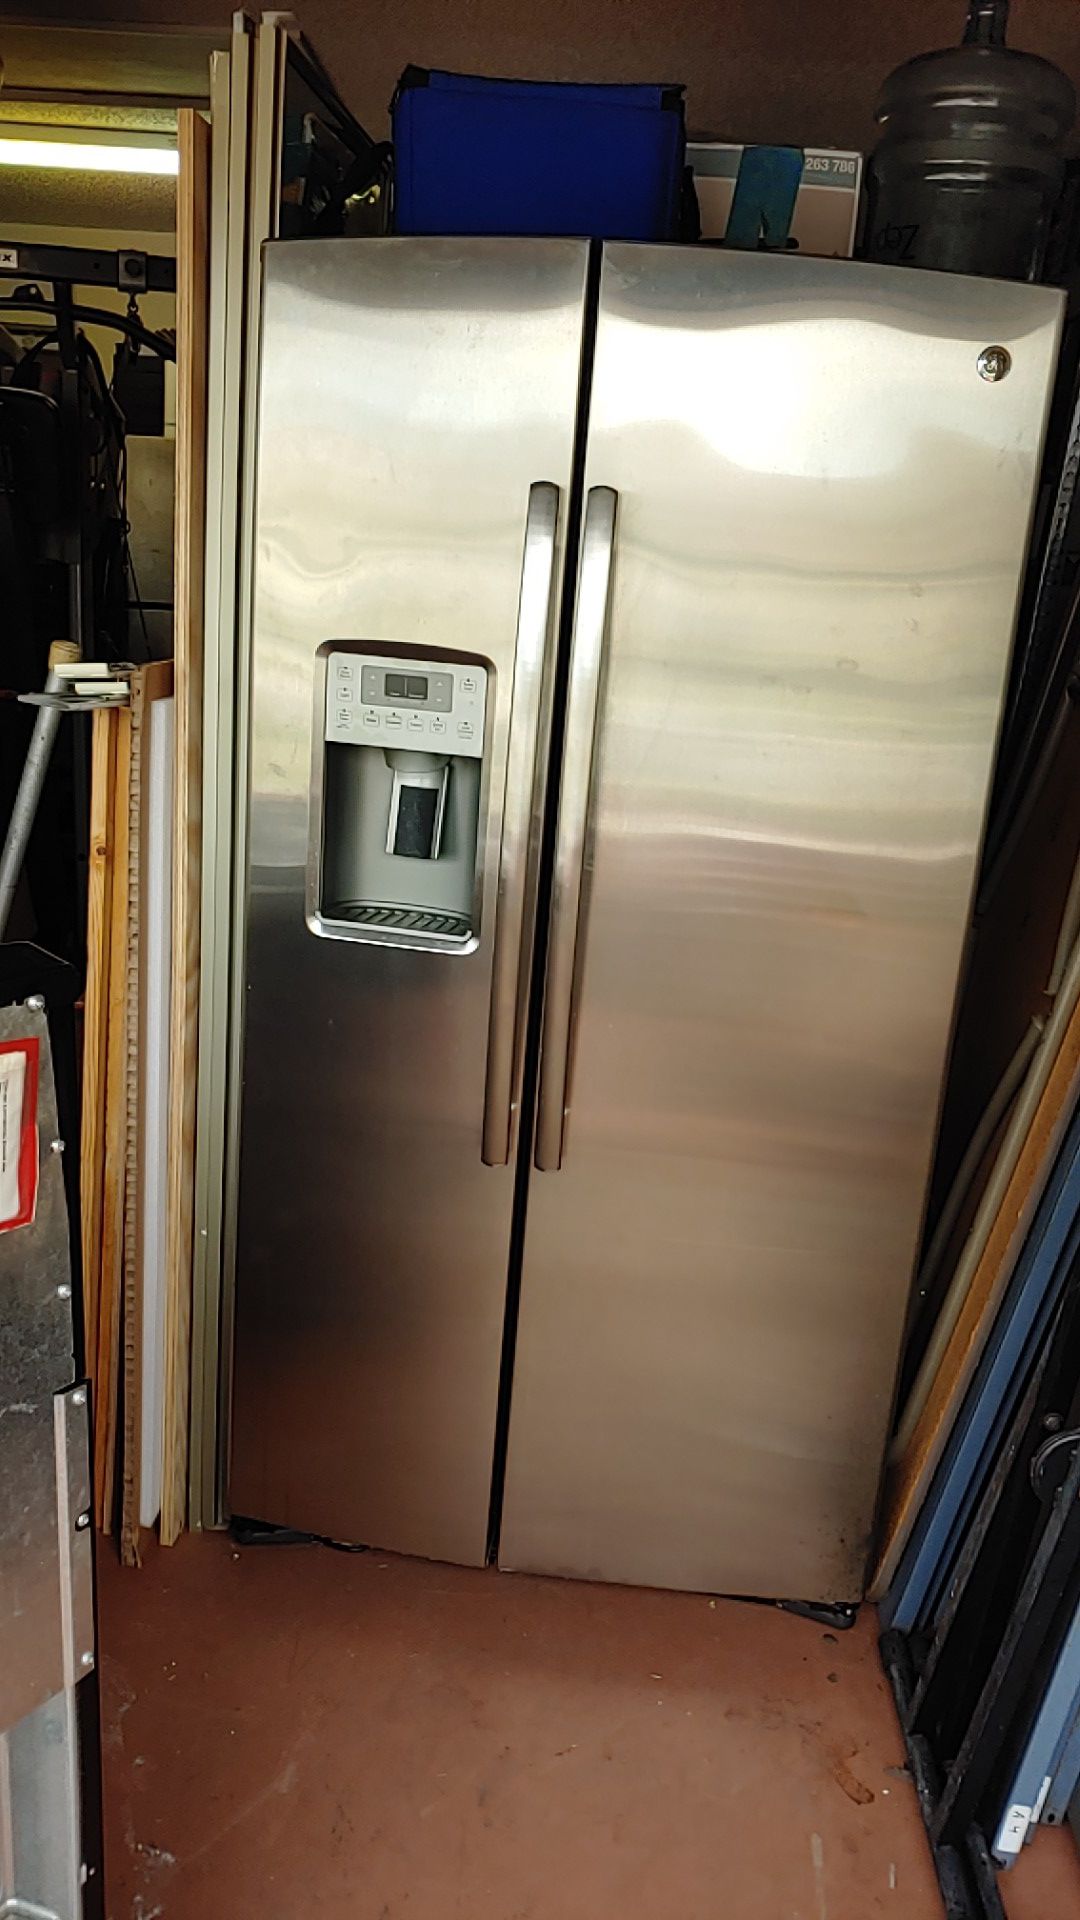 GE side-by-side refrigerator stainless steel front black on sides